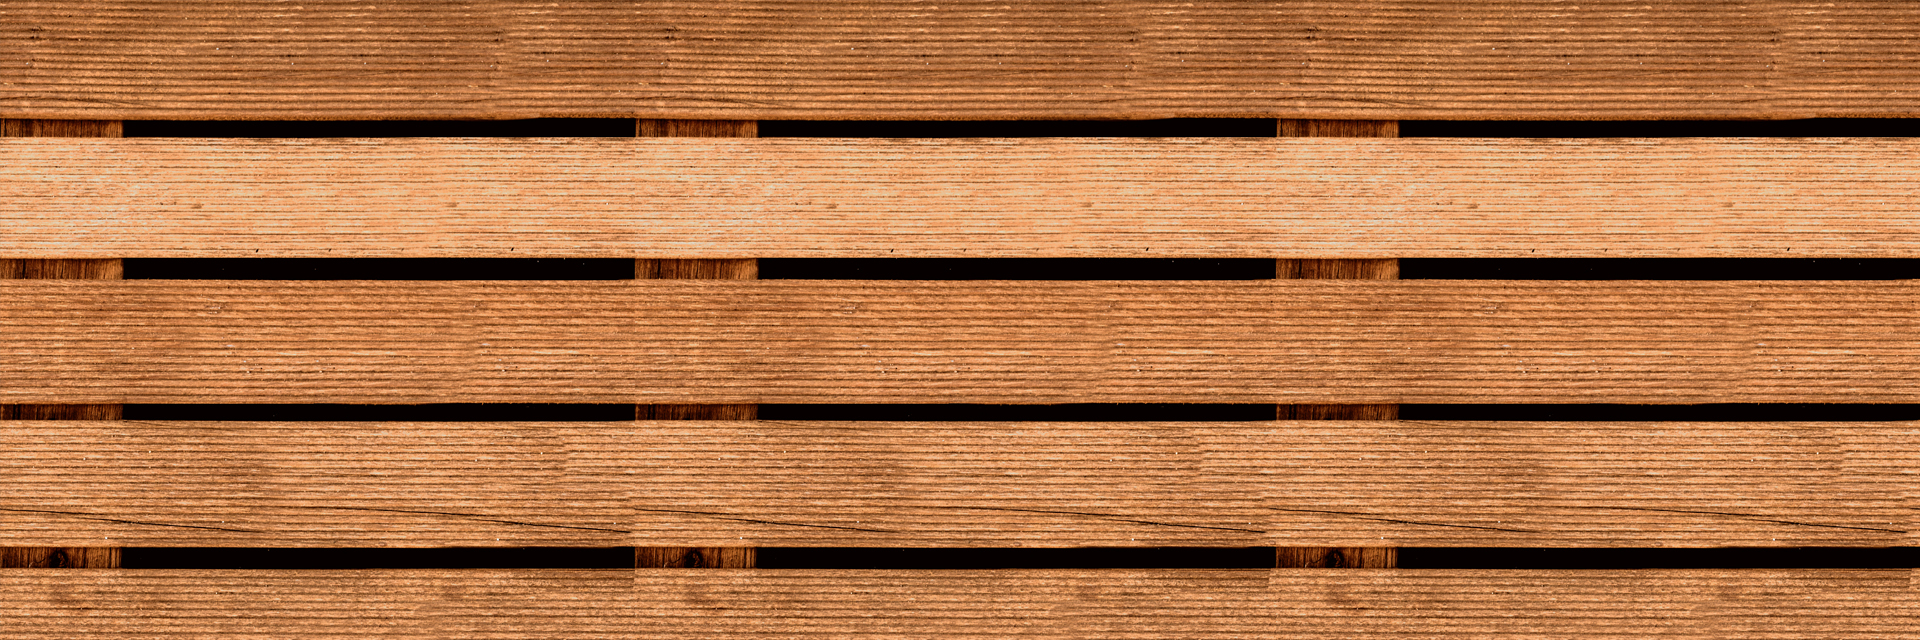 Image showing a top close up of a wooden pallet